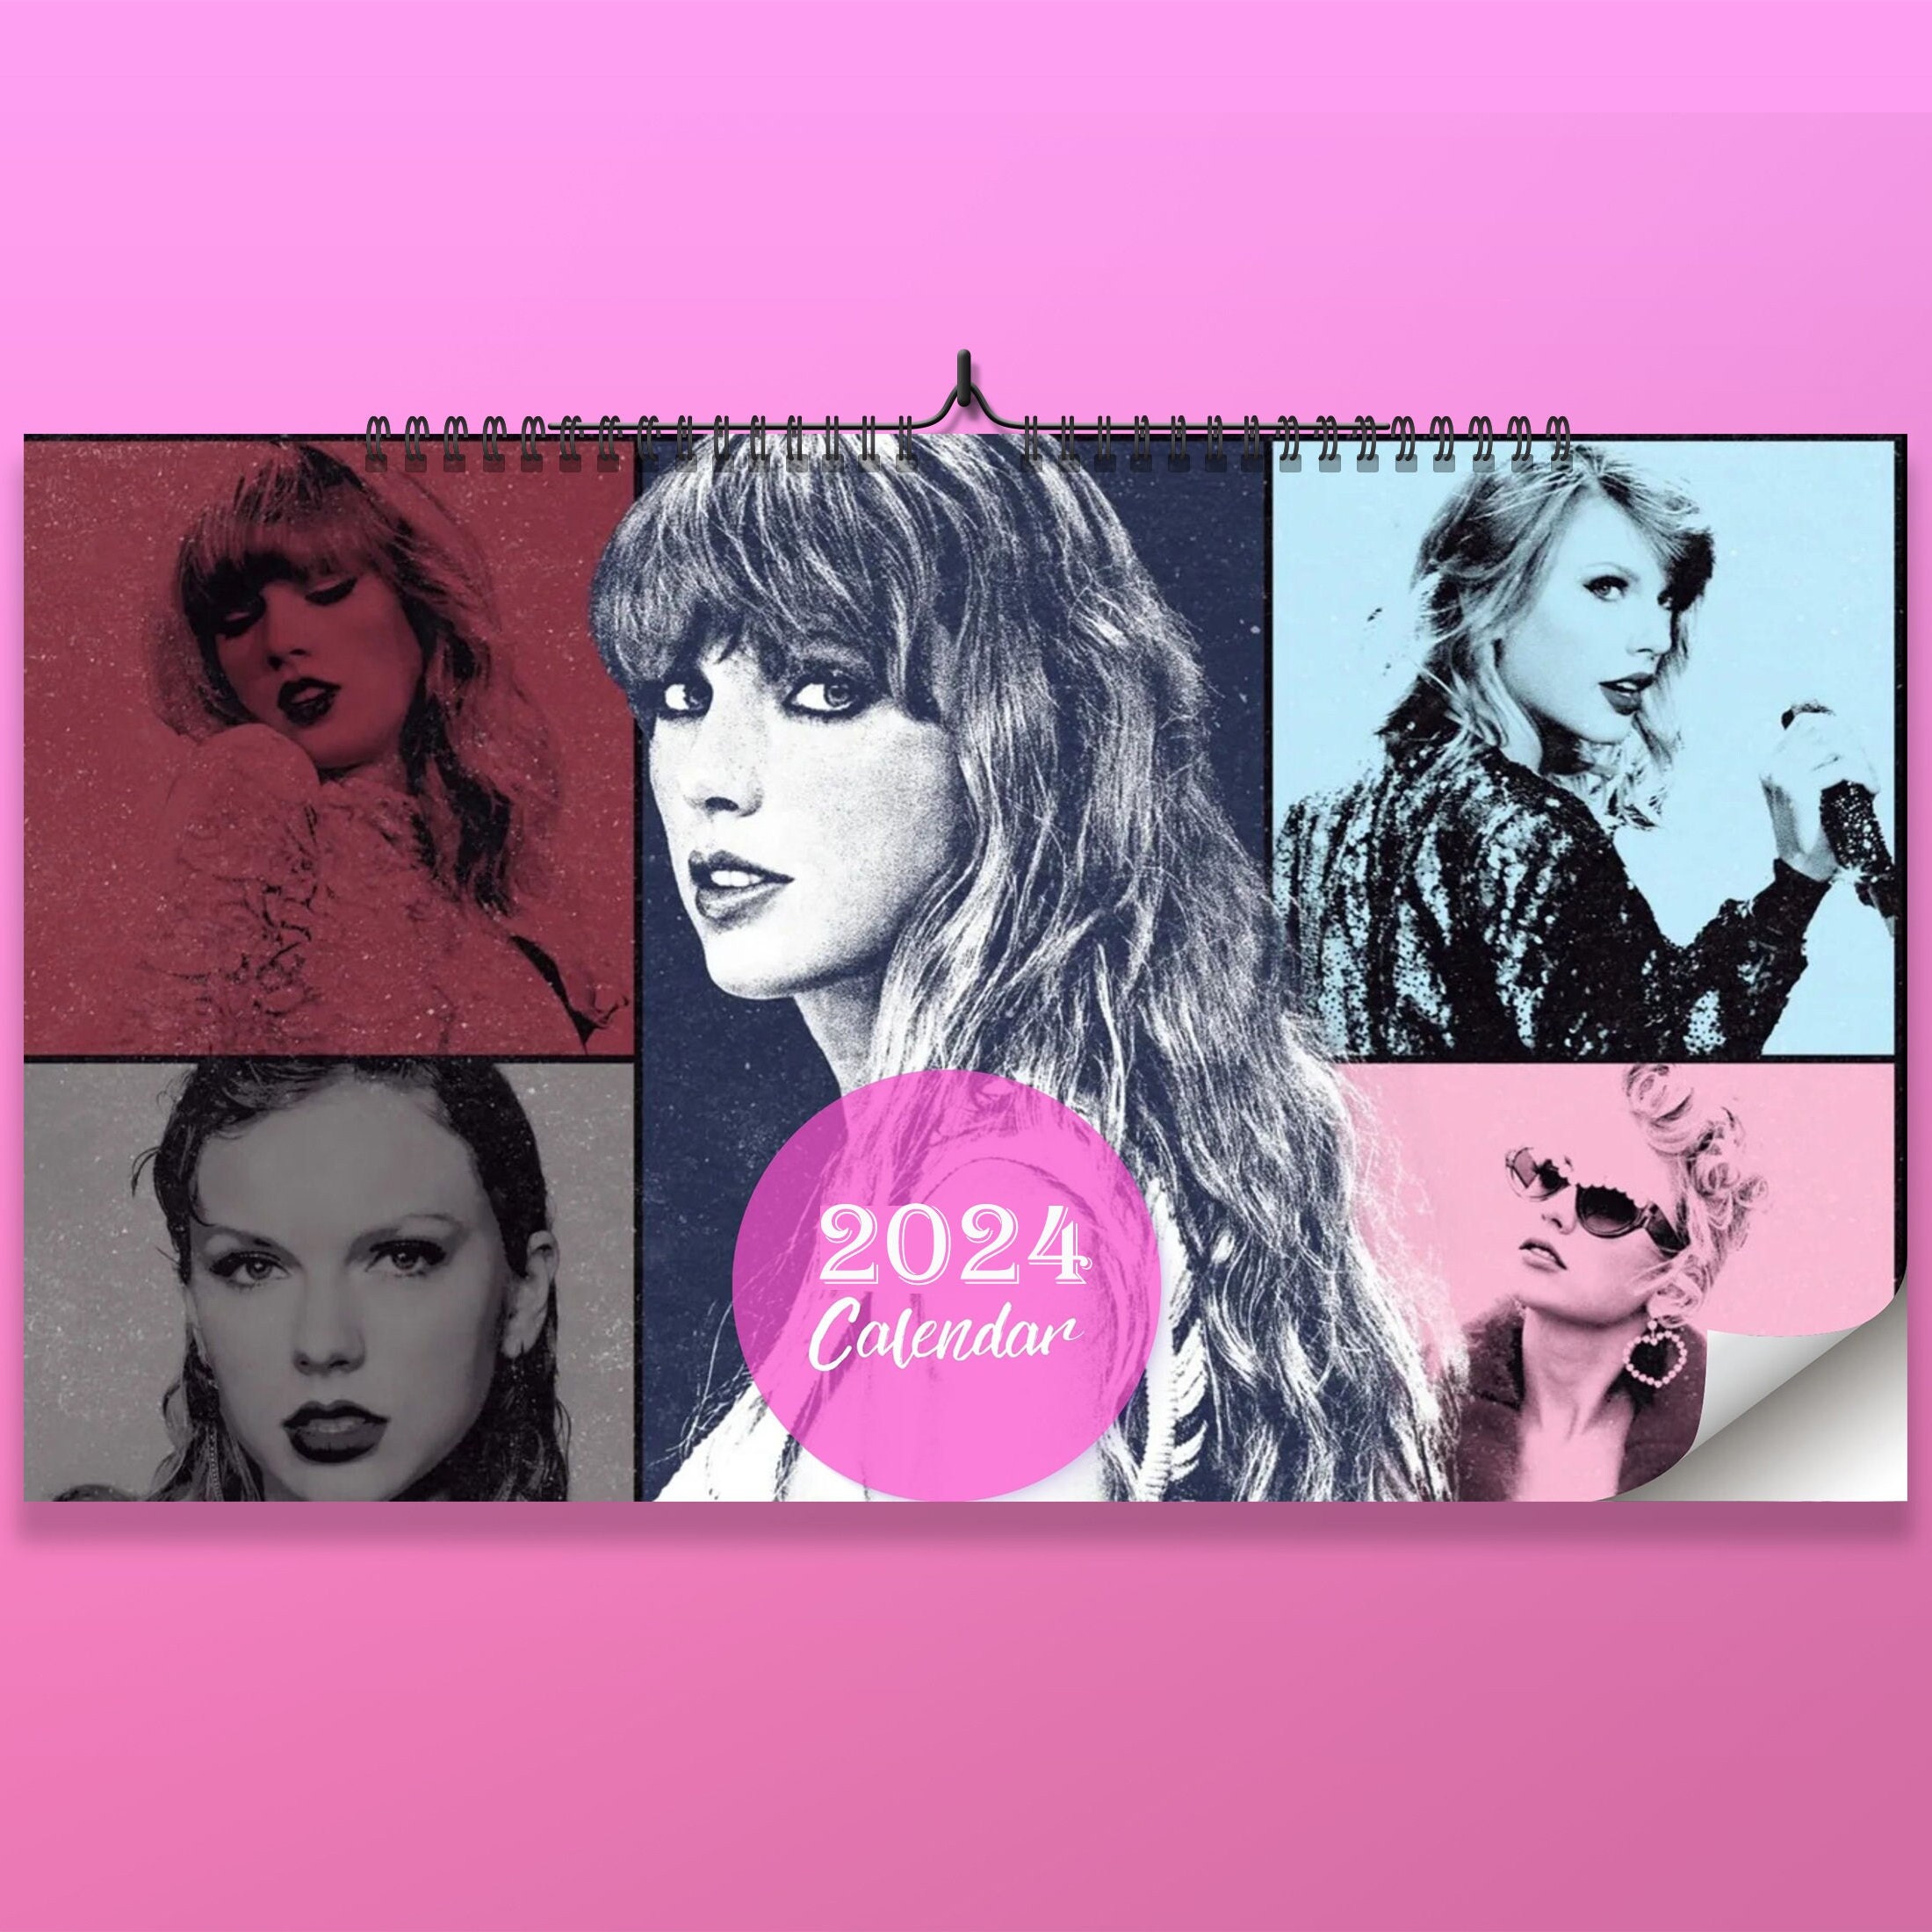 Calendrier 2024 Taylor Swift The Eras Tour Calendrier Compitiabe Withfan